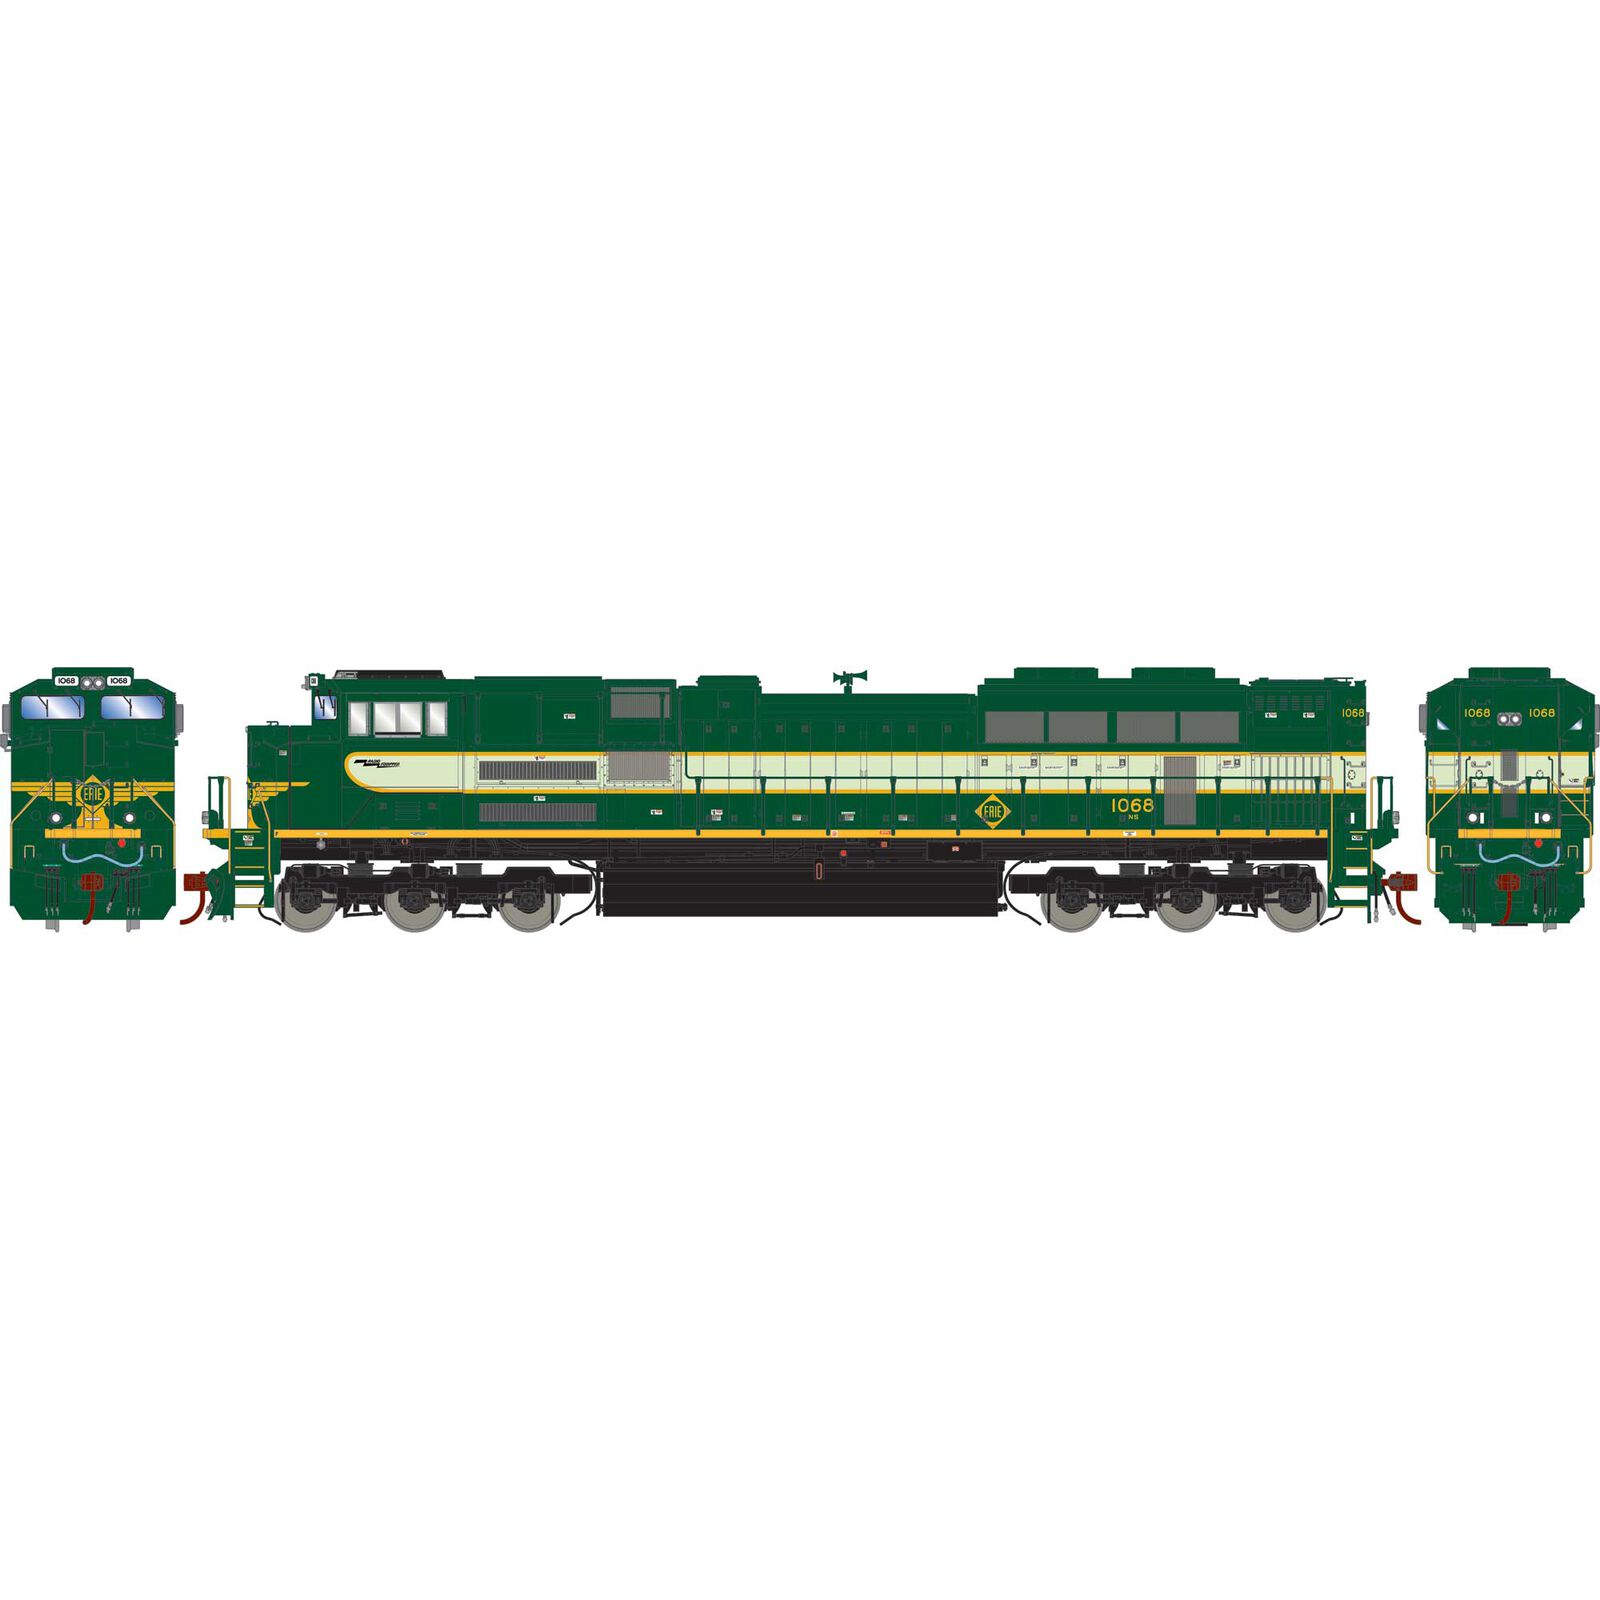 HO SD70ACe Locomotive with DCC & Sound, NS/Erie Heritage #1068